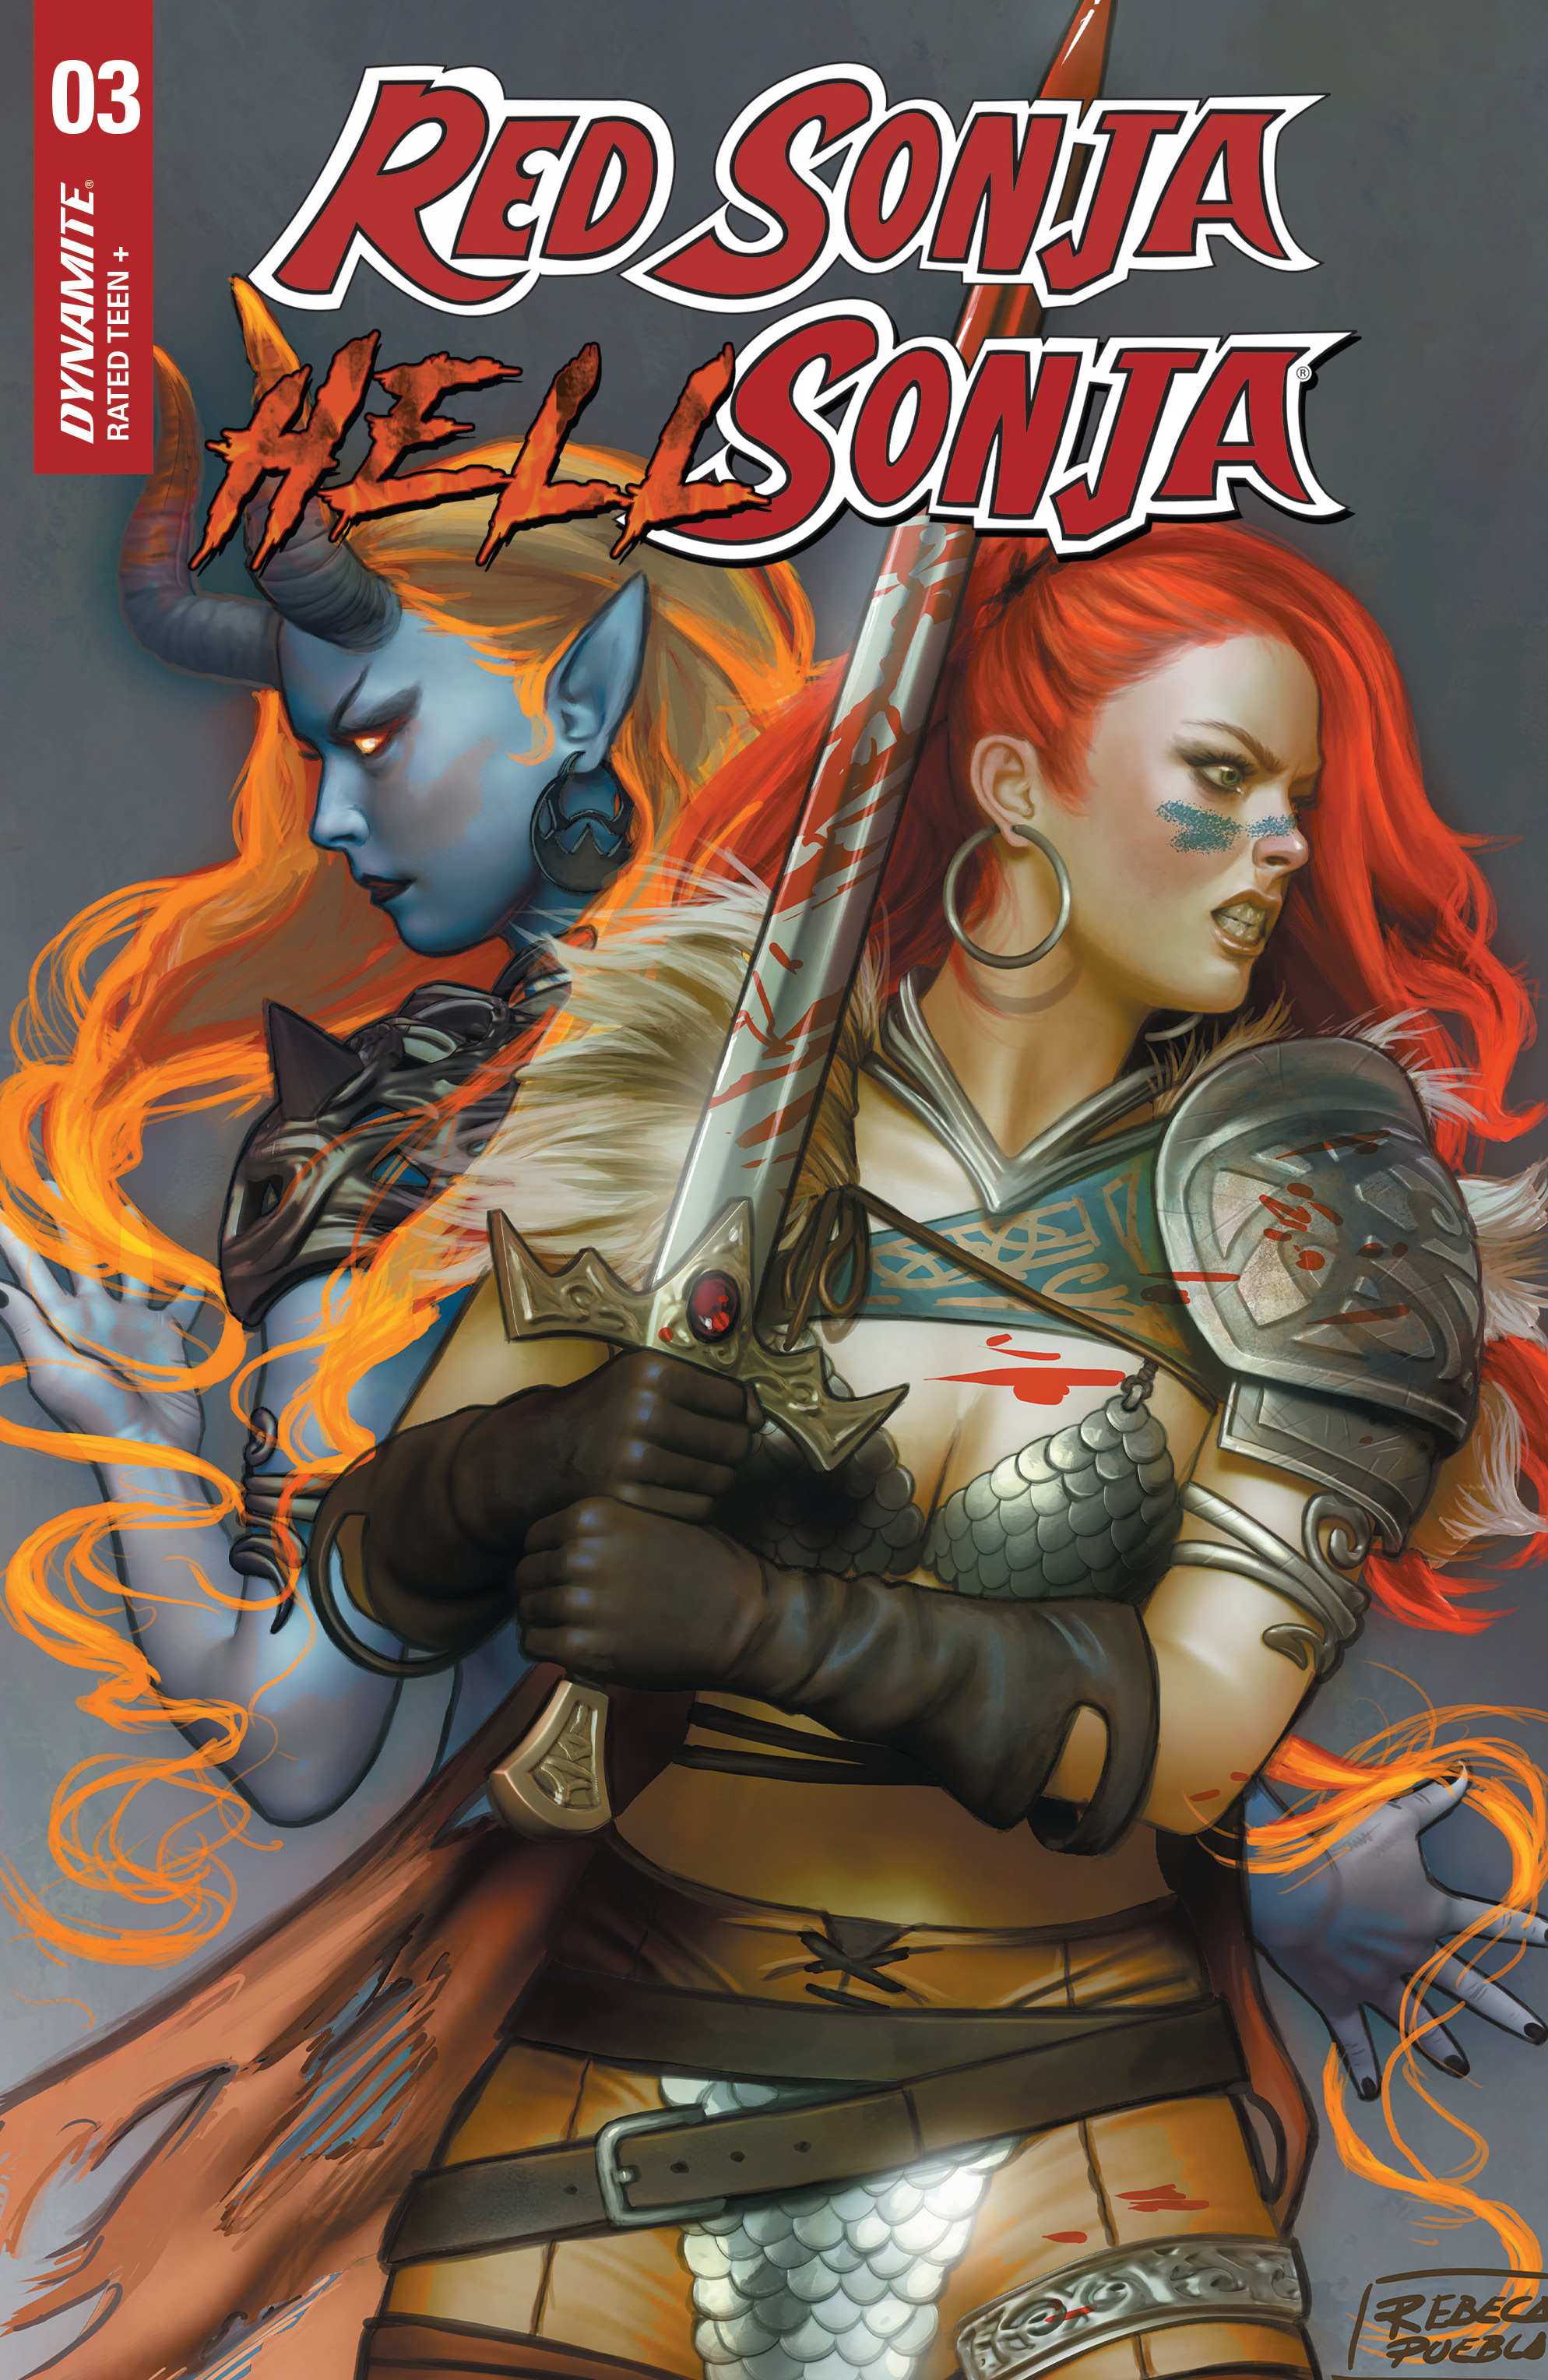 Read online Red Sonja / Hell Sonja comic -  Issue #3 - 4